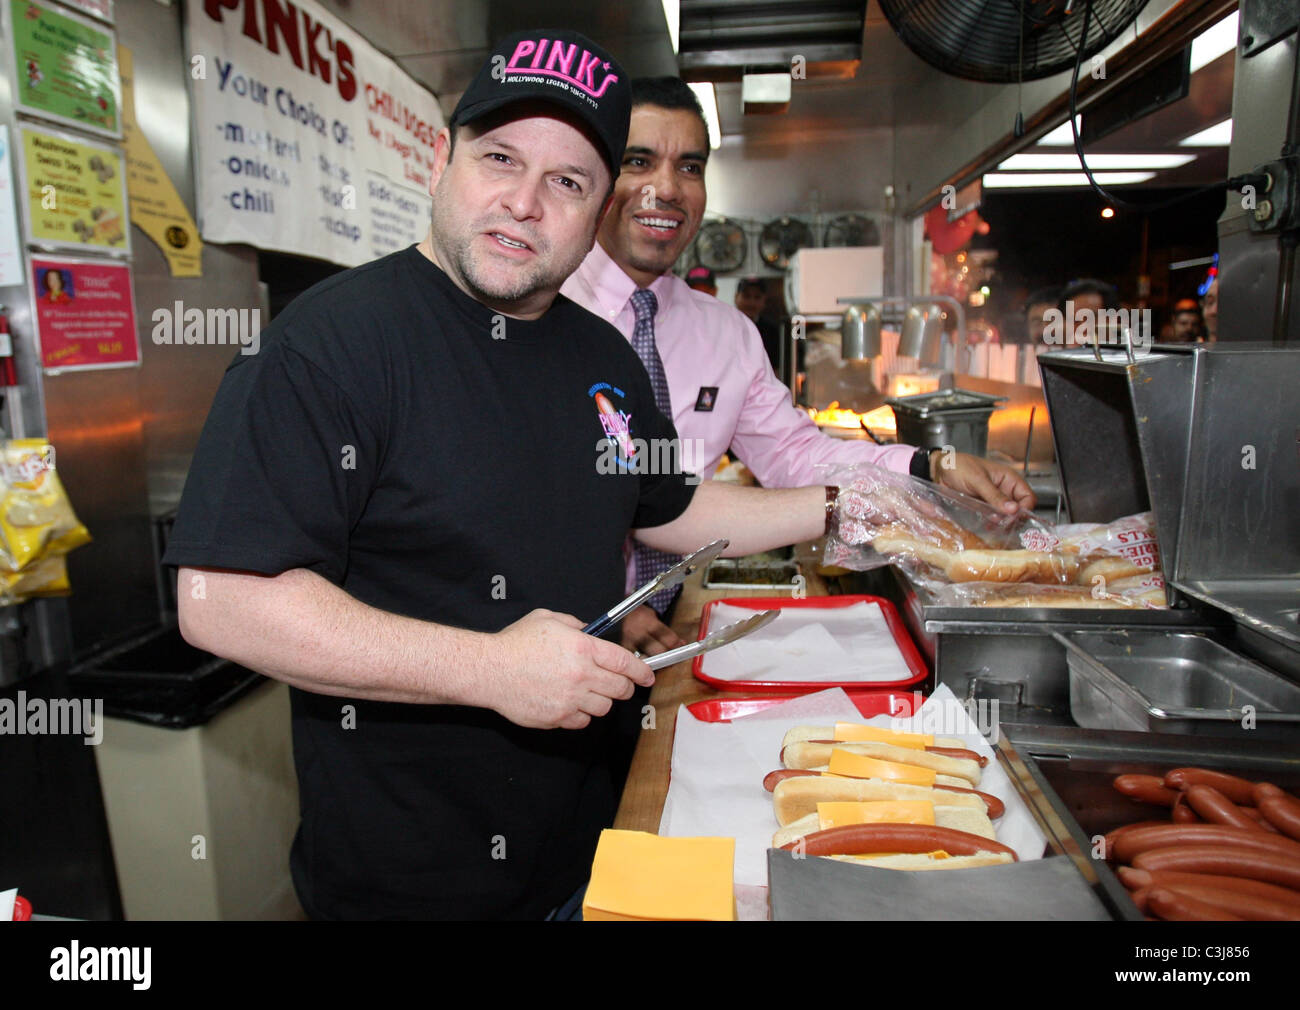 Jason Alexander serves hot dogs at Pink's Hot Dogs Los Angeles, California - 11.11.09 Stock Photo